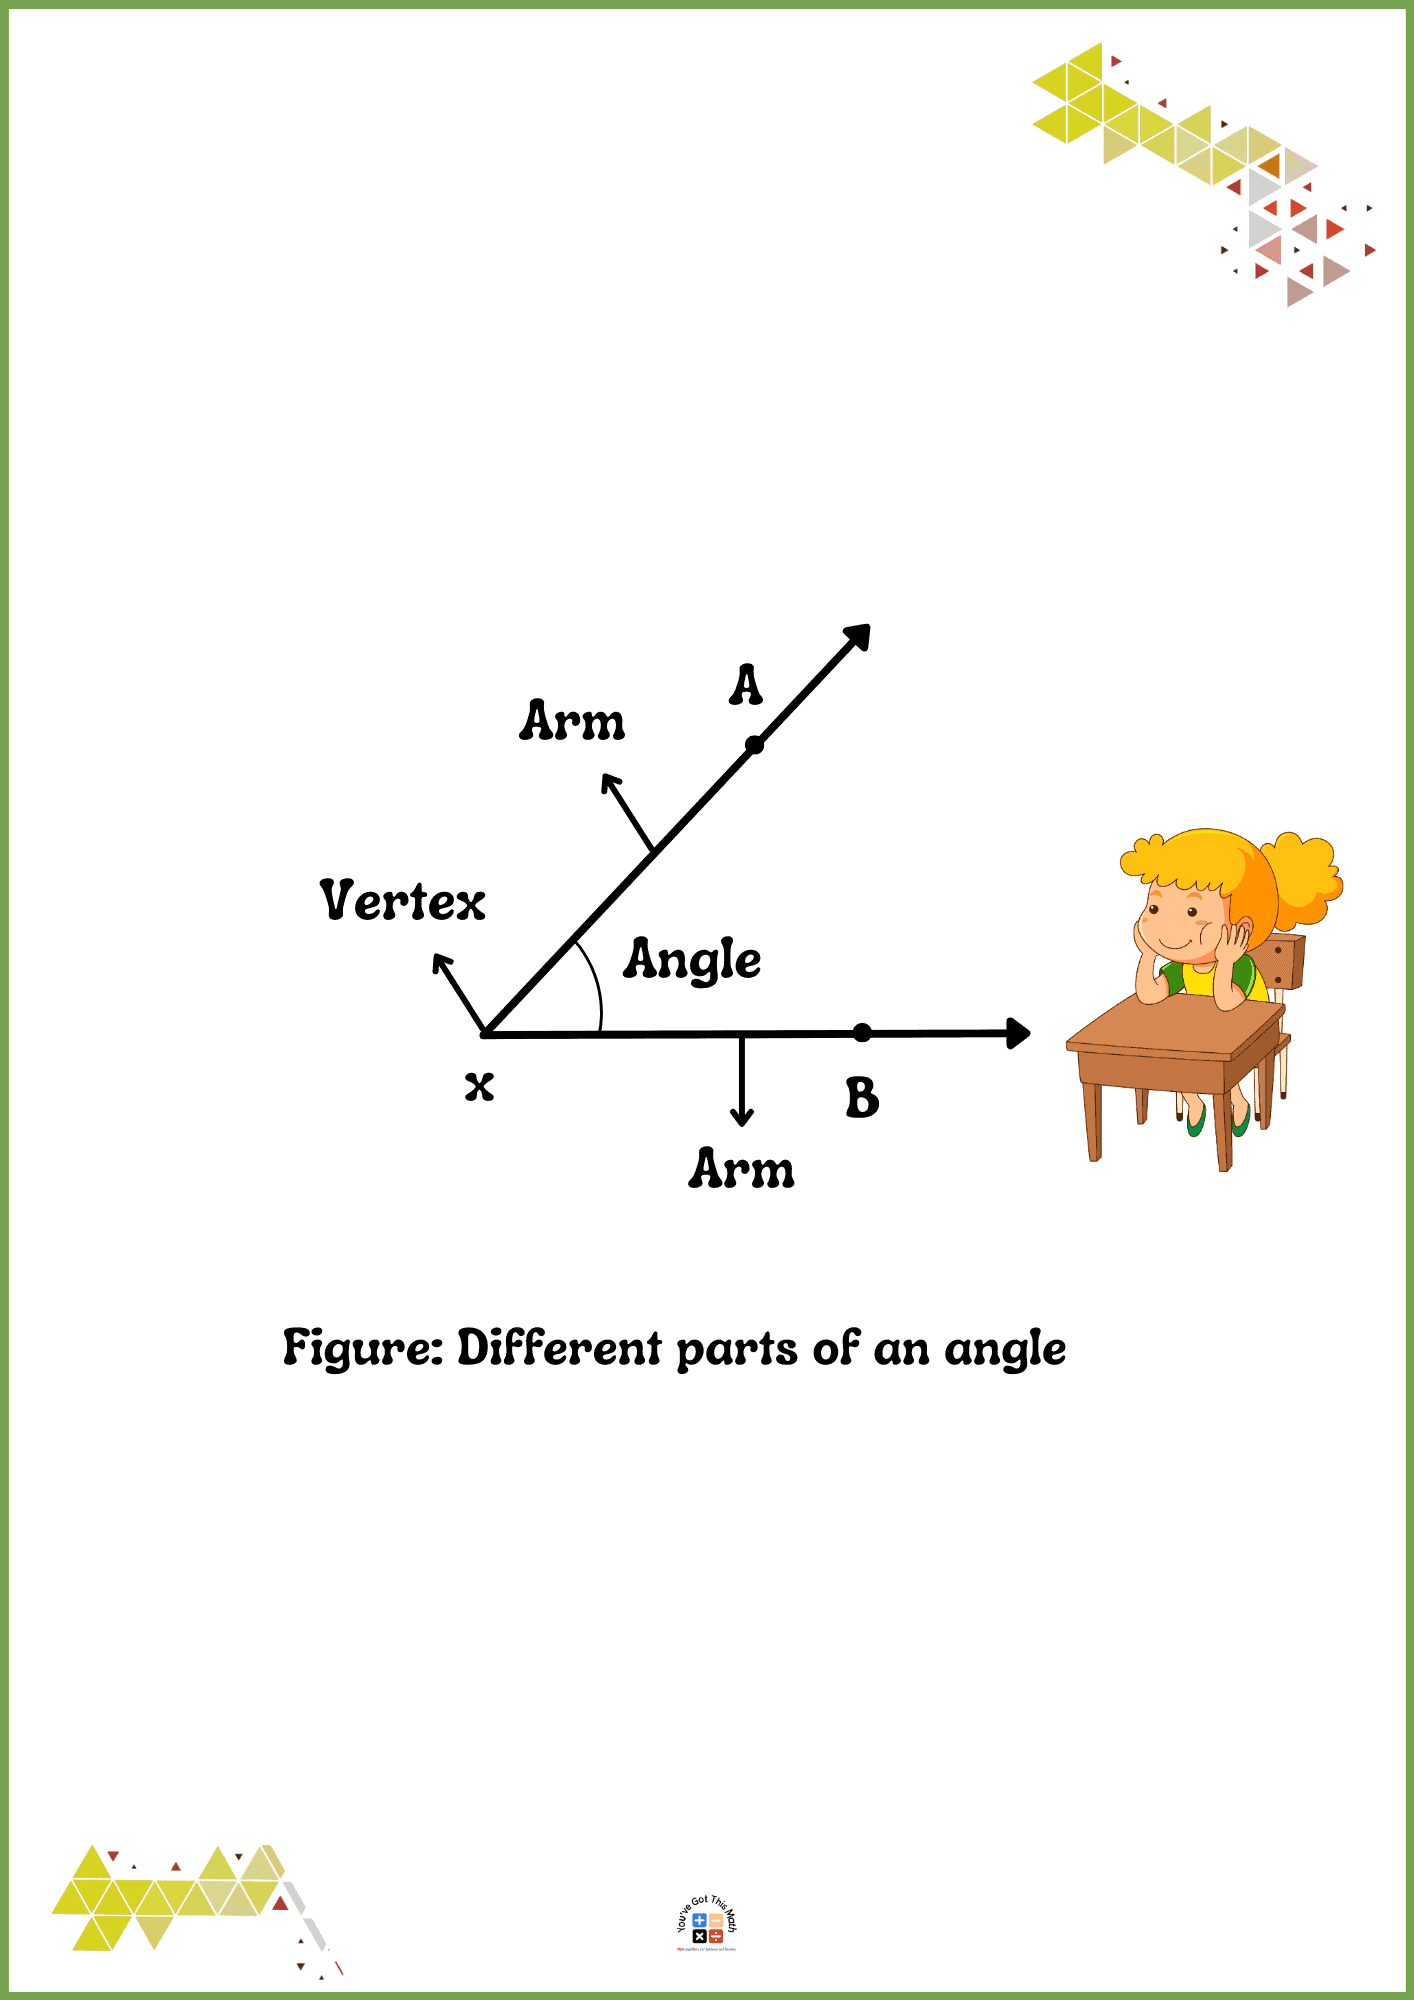 Explaining Parts of Angles